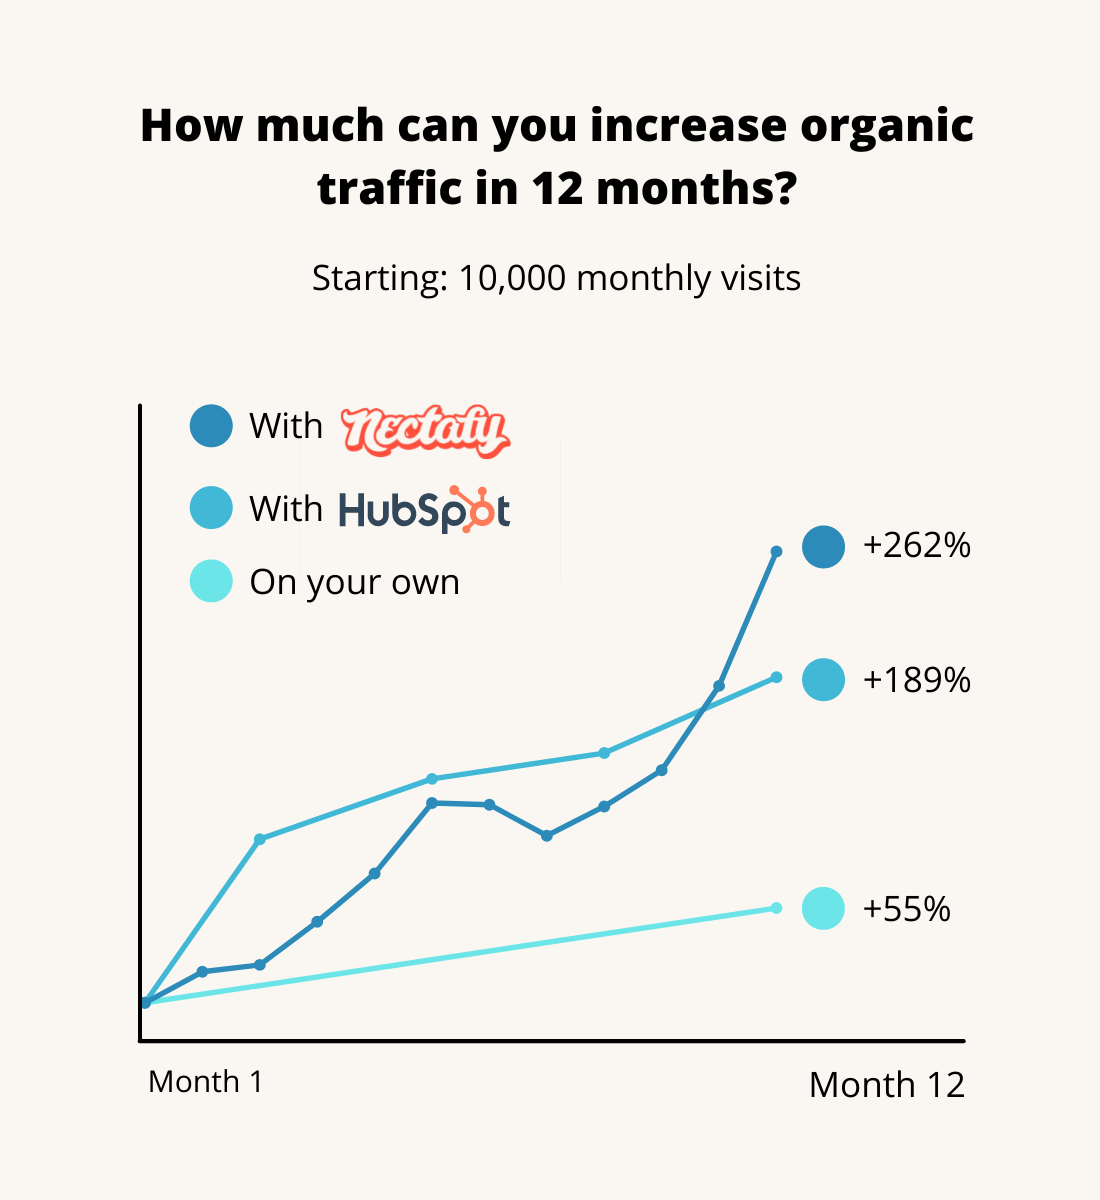 How Much Can You Increase Organic Traffic In 12 Months [calculator]